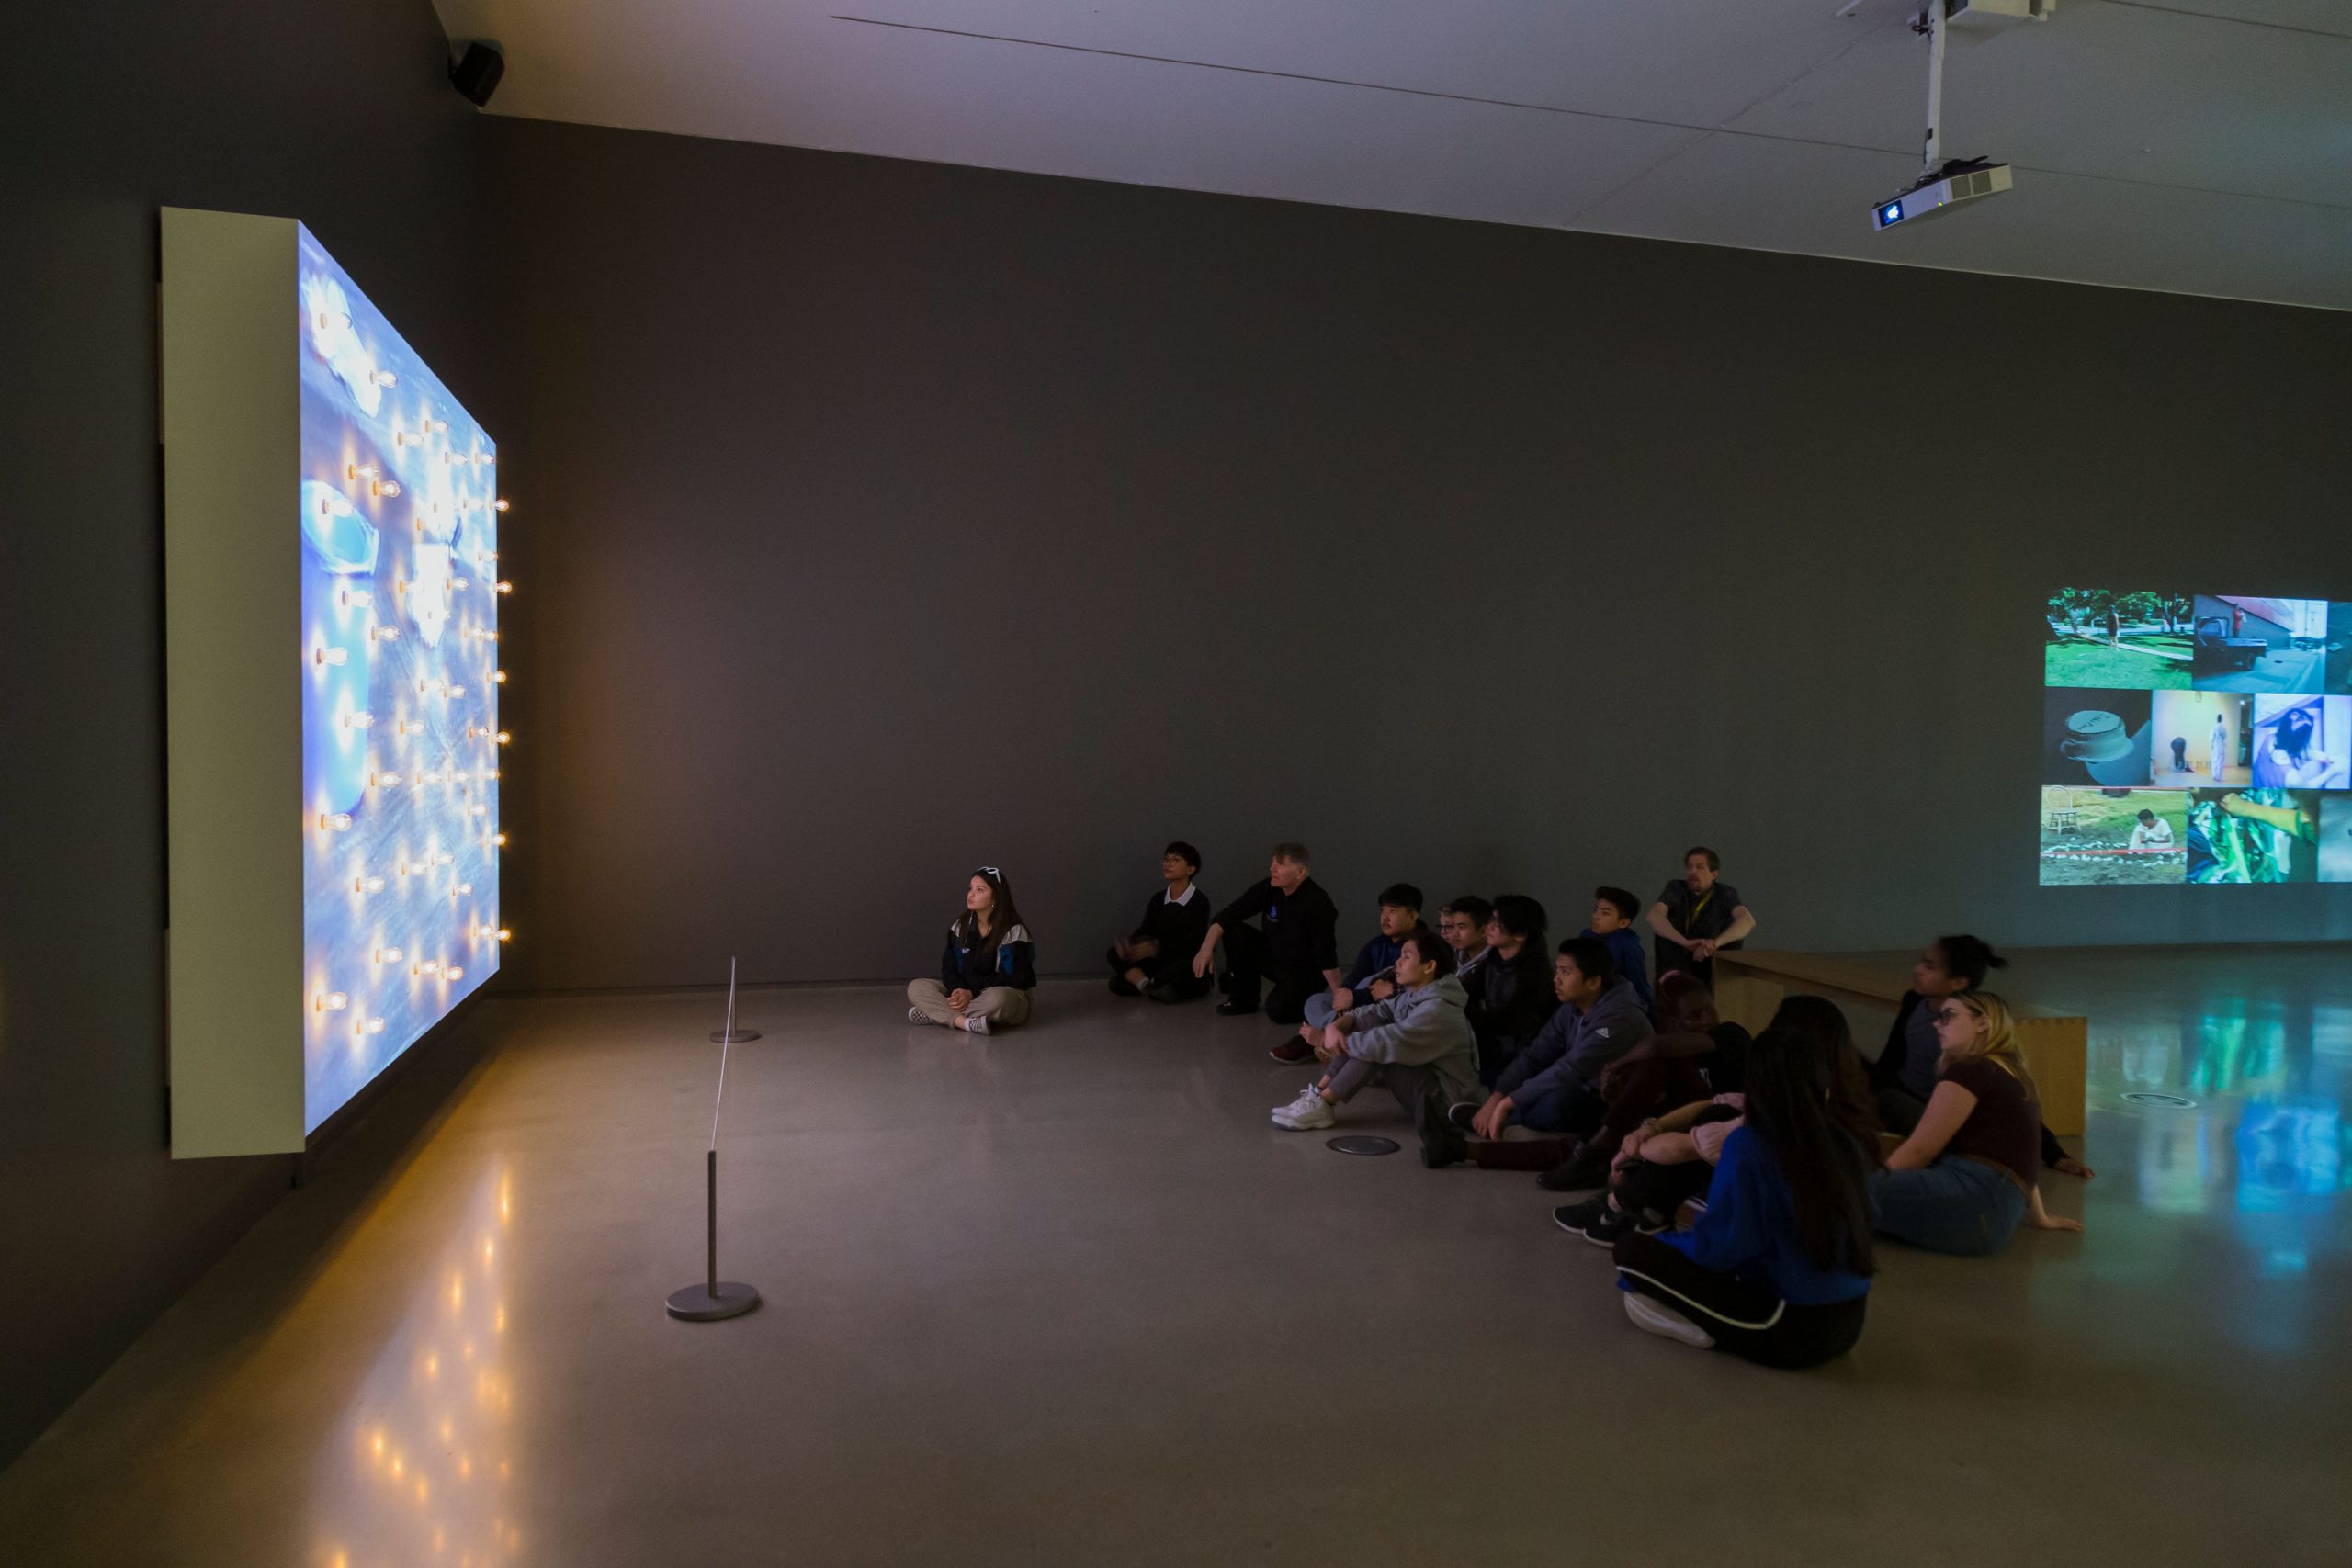 A group of students watch a media artwork in an art gallery